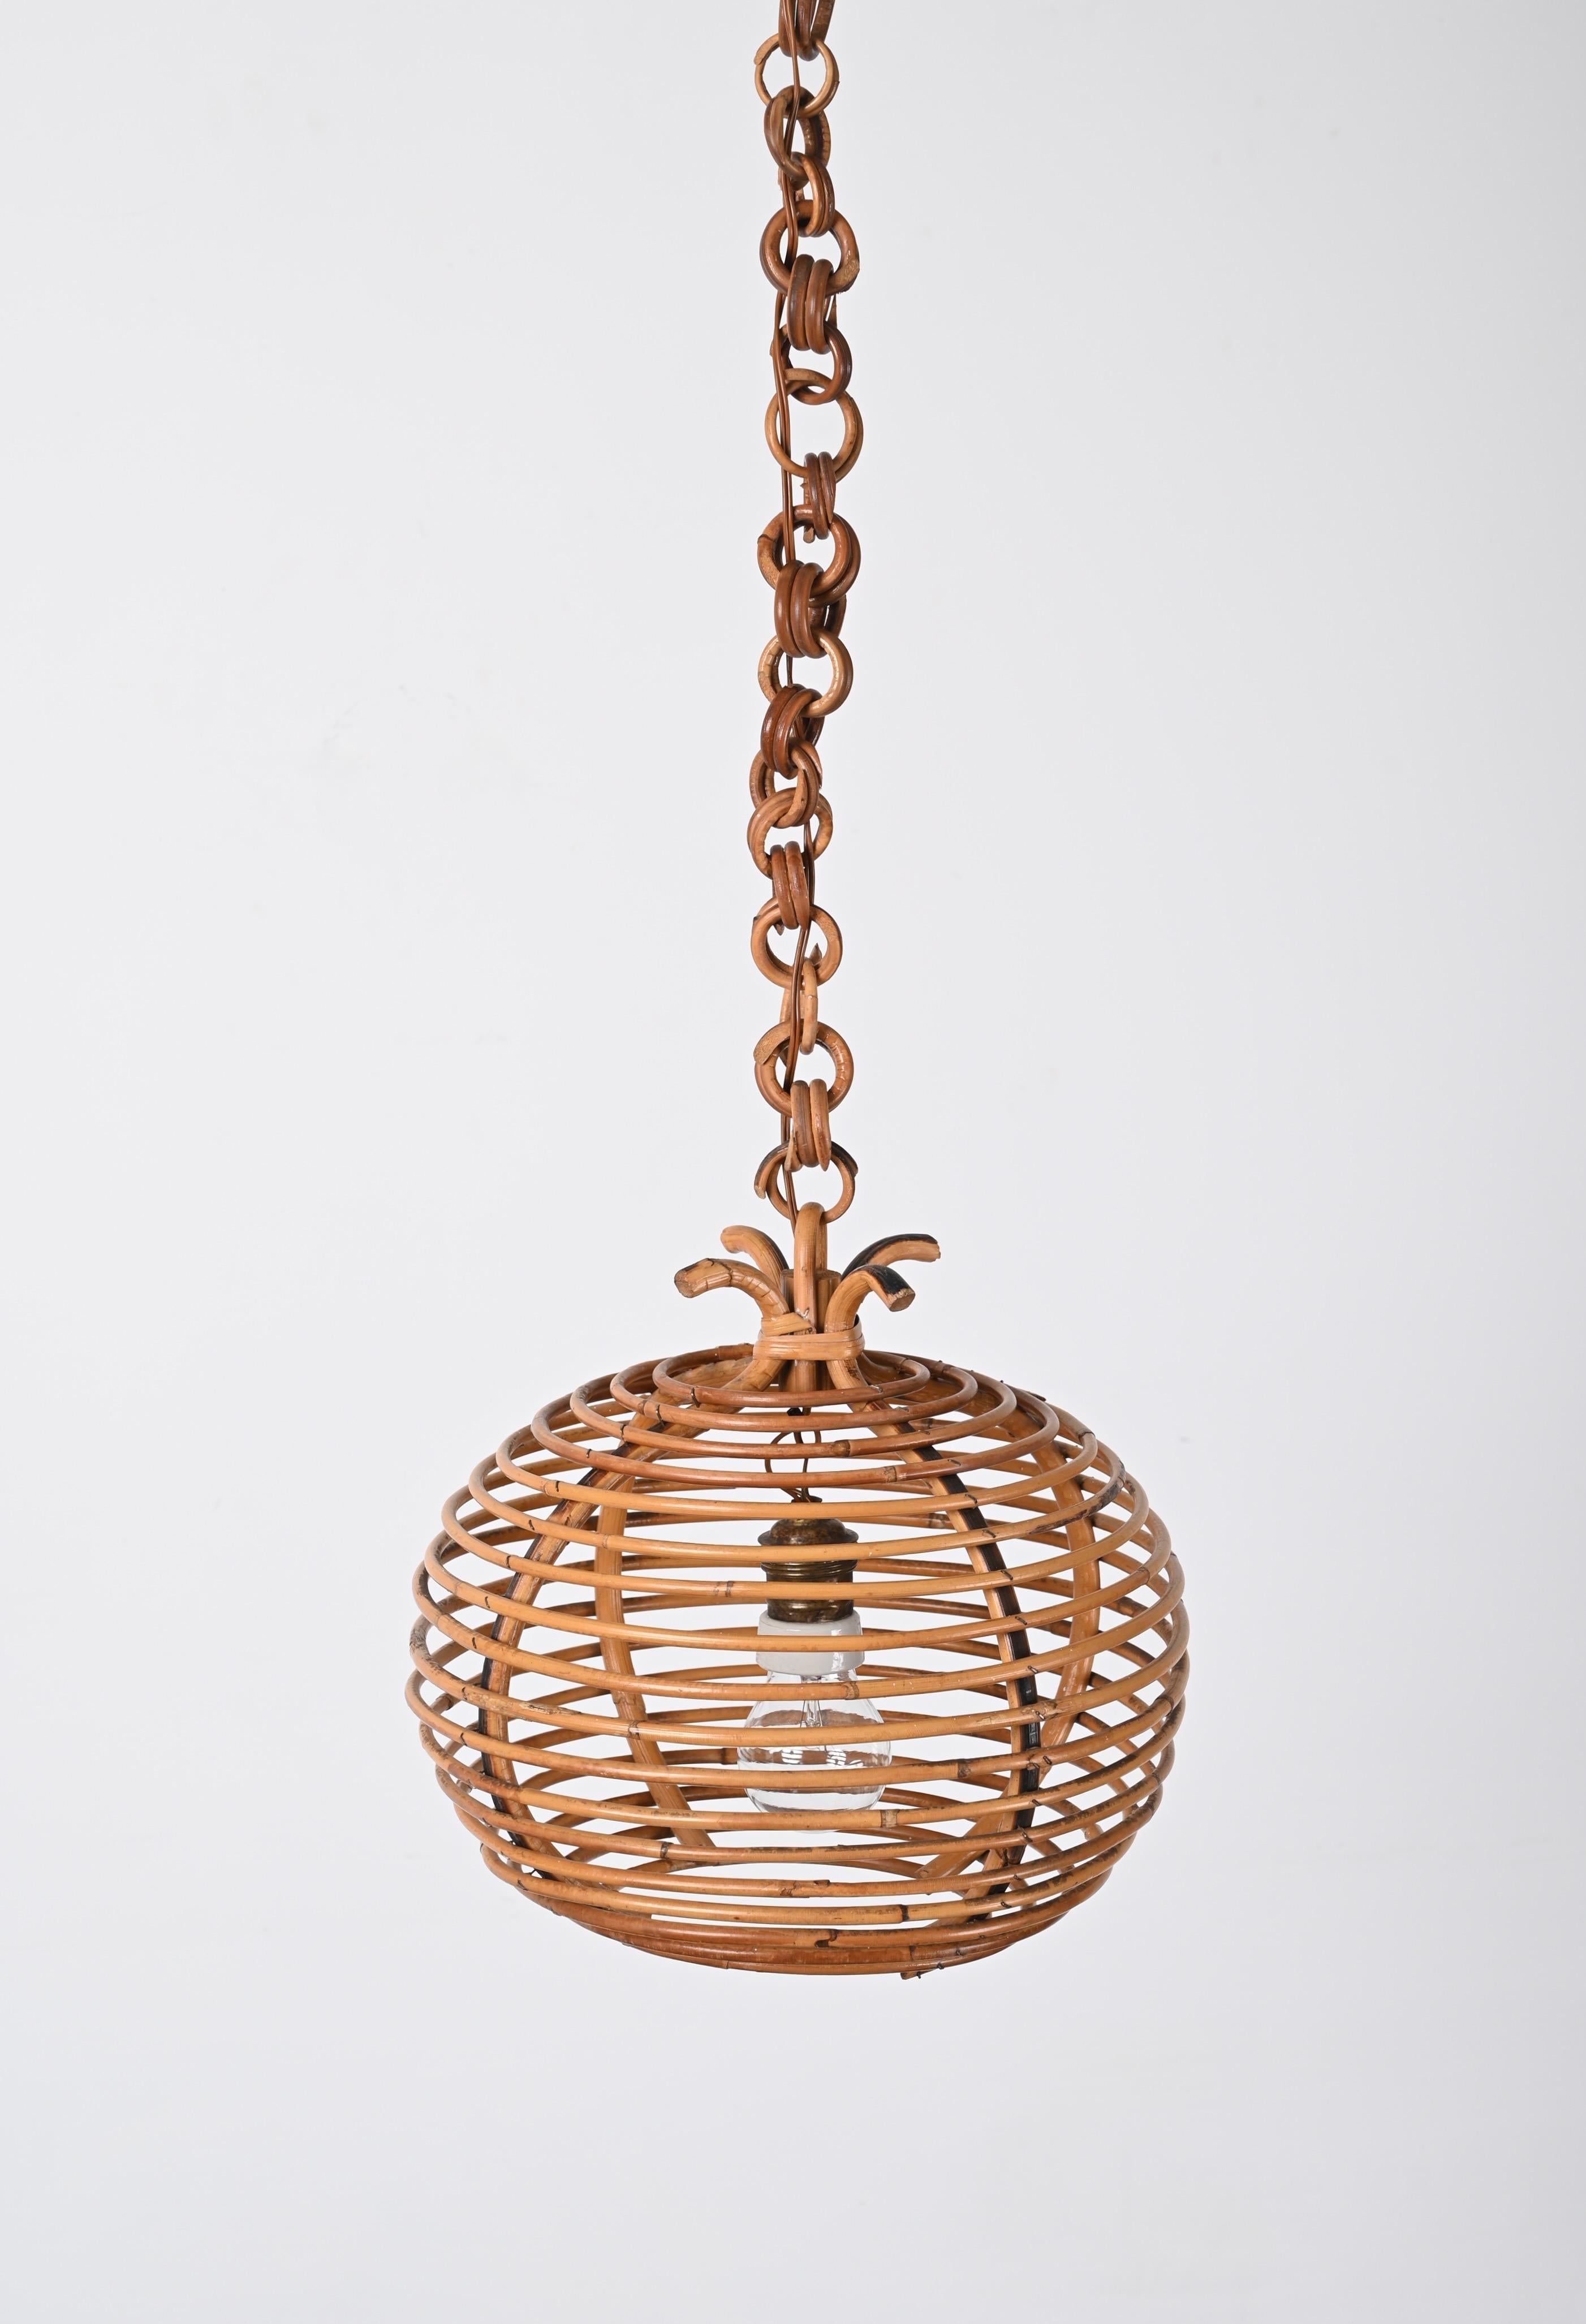 Midcentury French Riviera Bambo and Rattan Spherical Italian Chandelier, 1960s For Sale 5